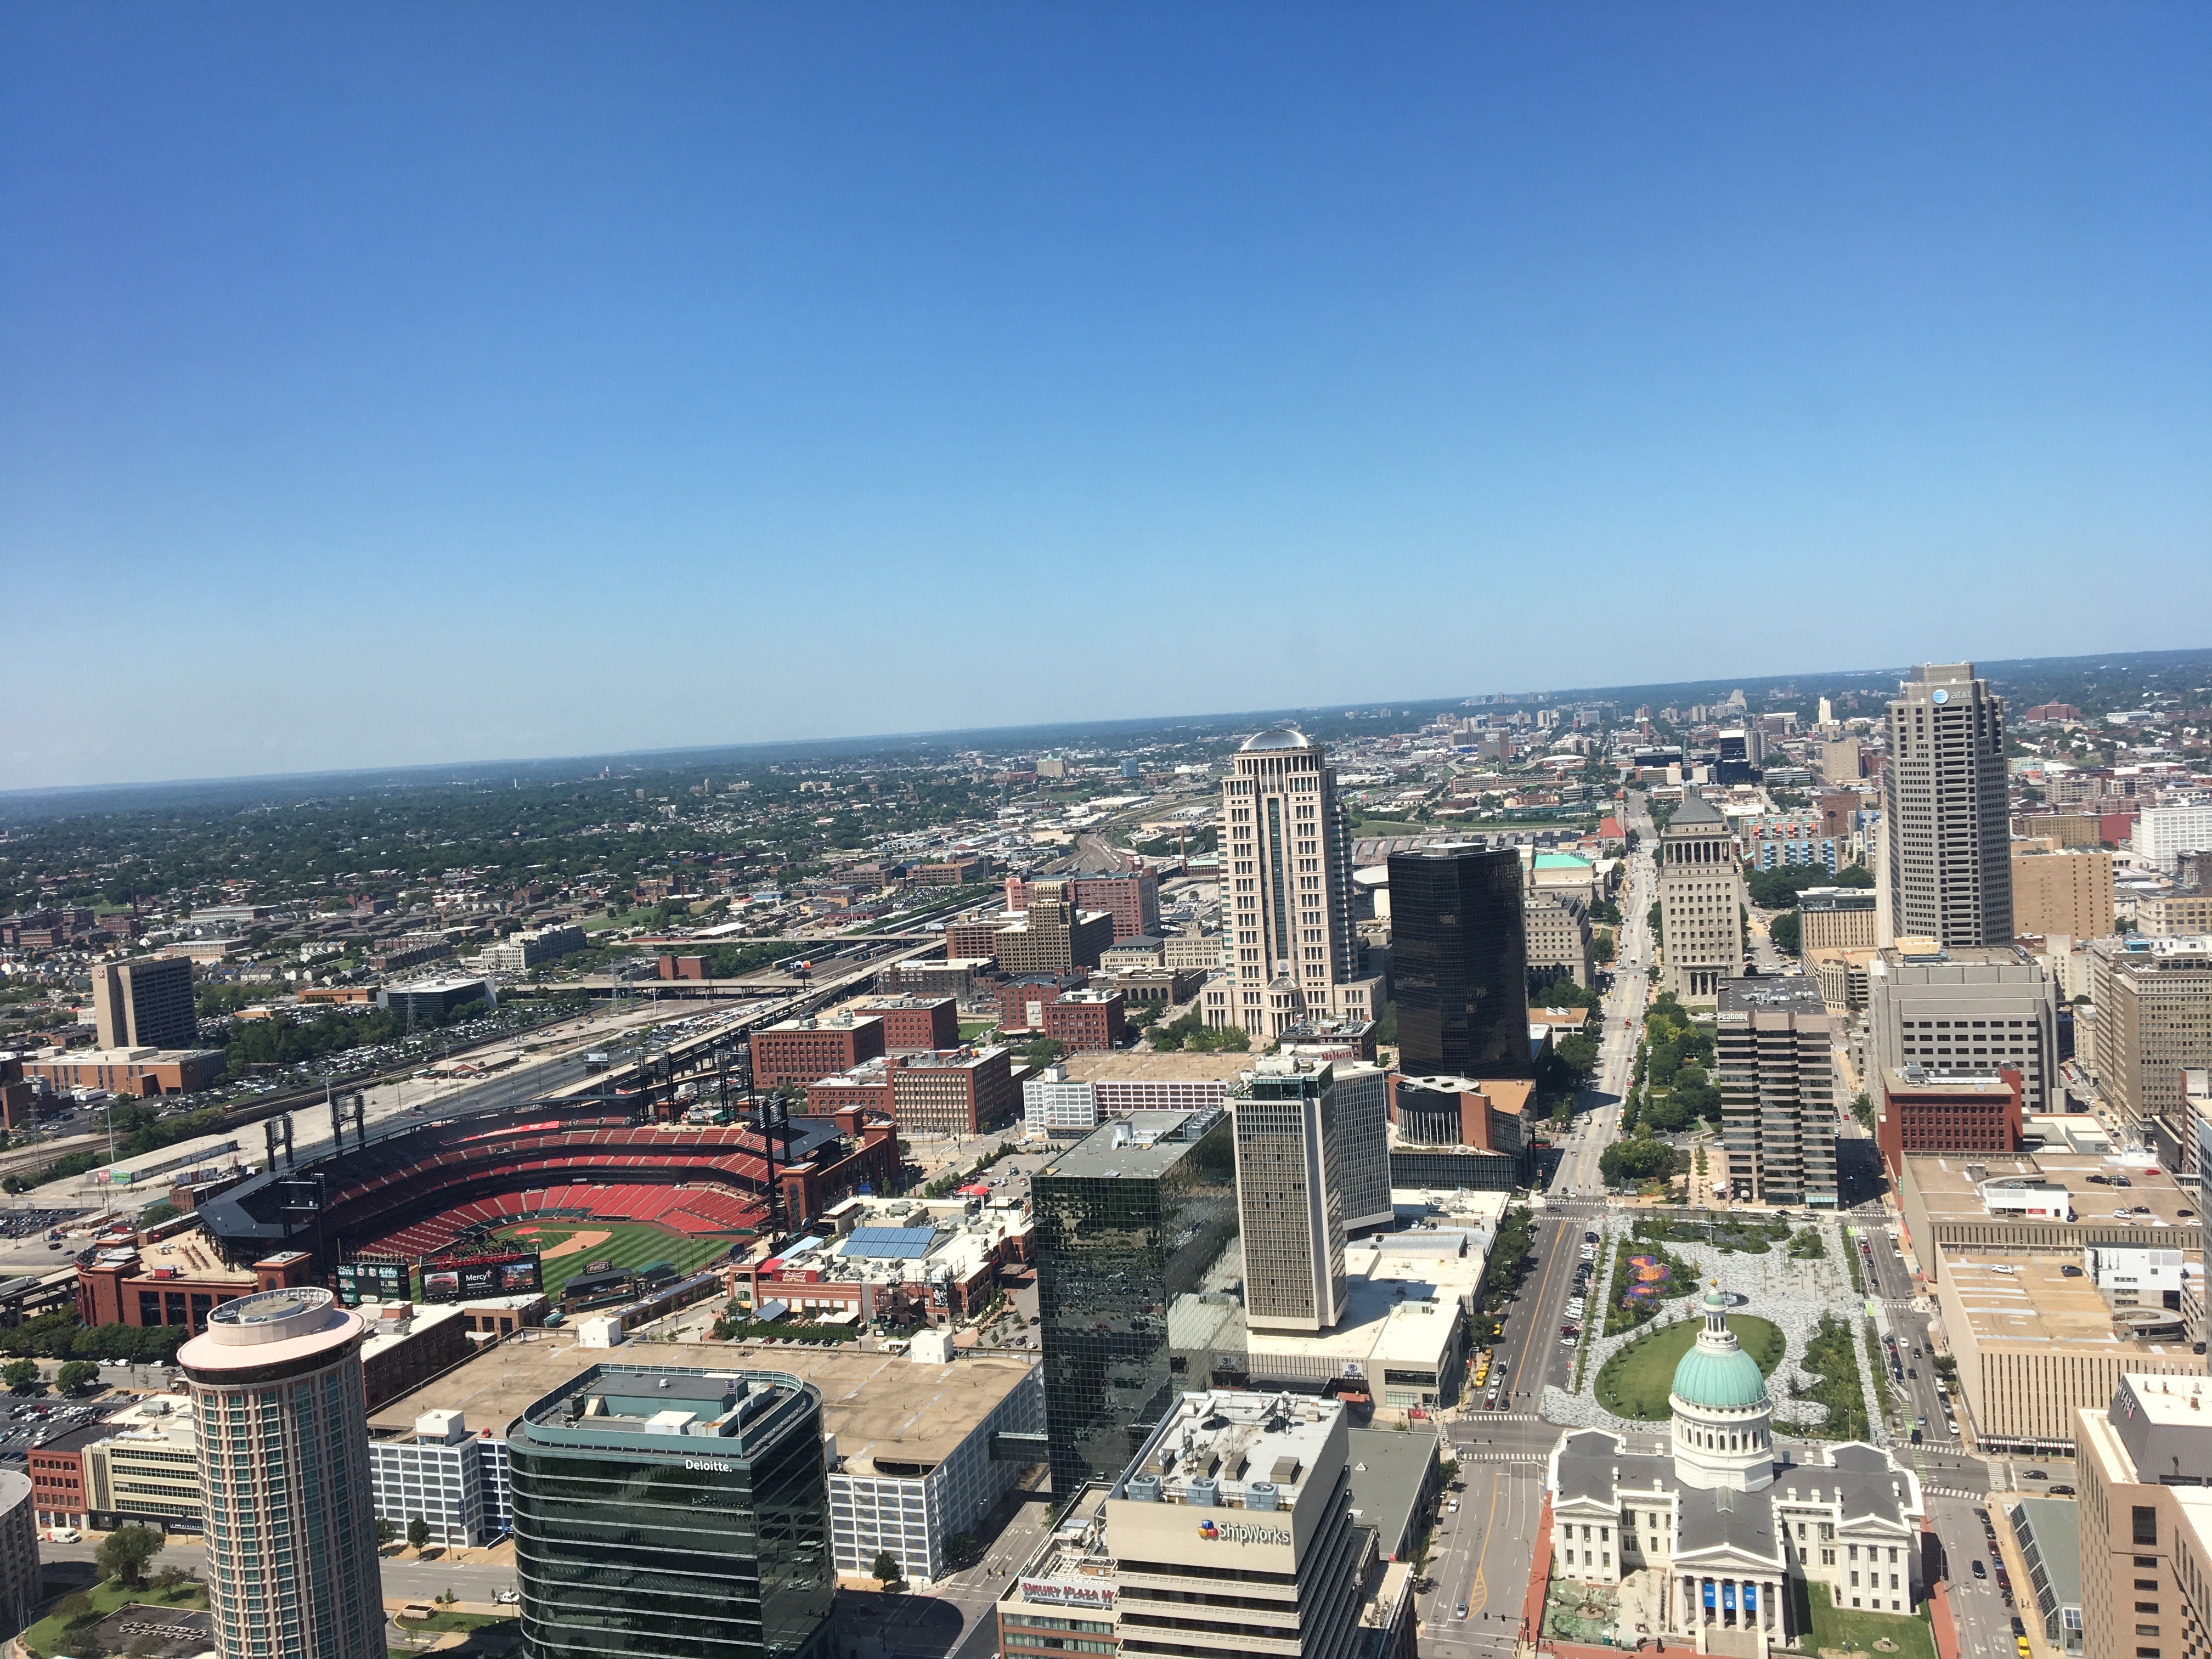 A view from the top of the Saint Louis Gateway